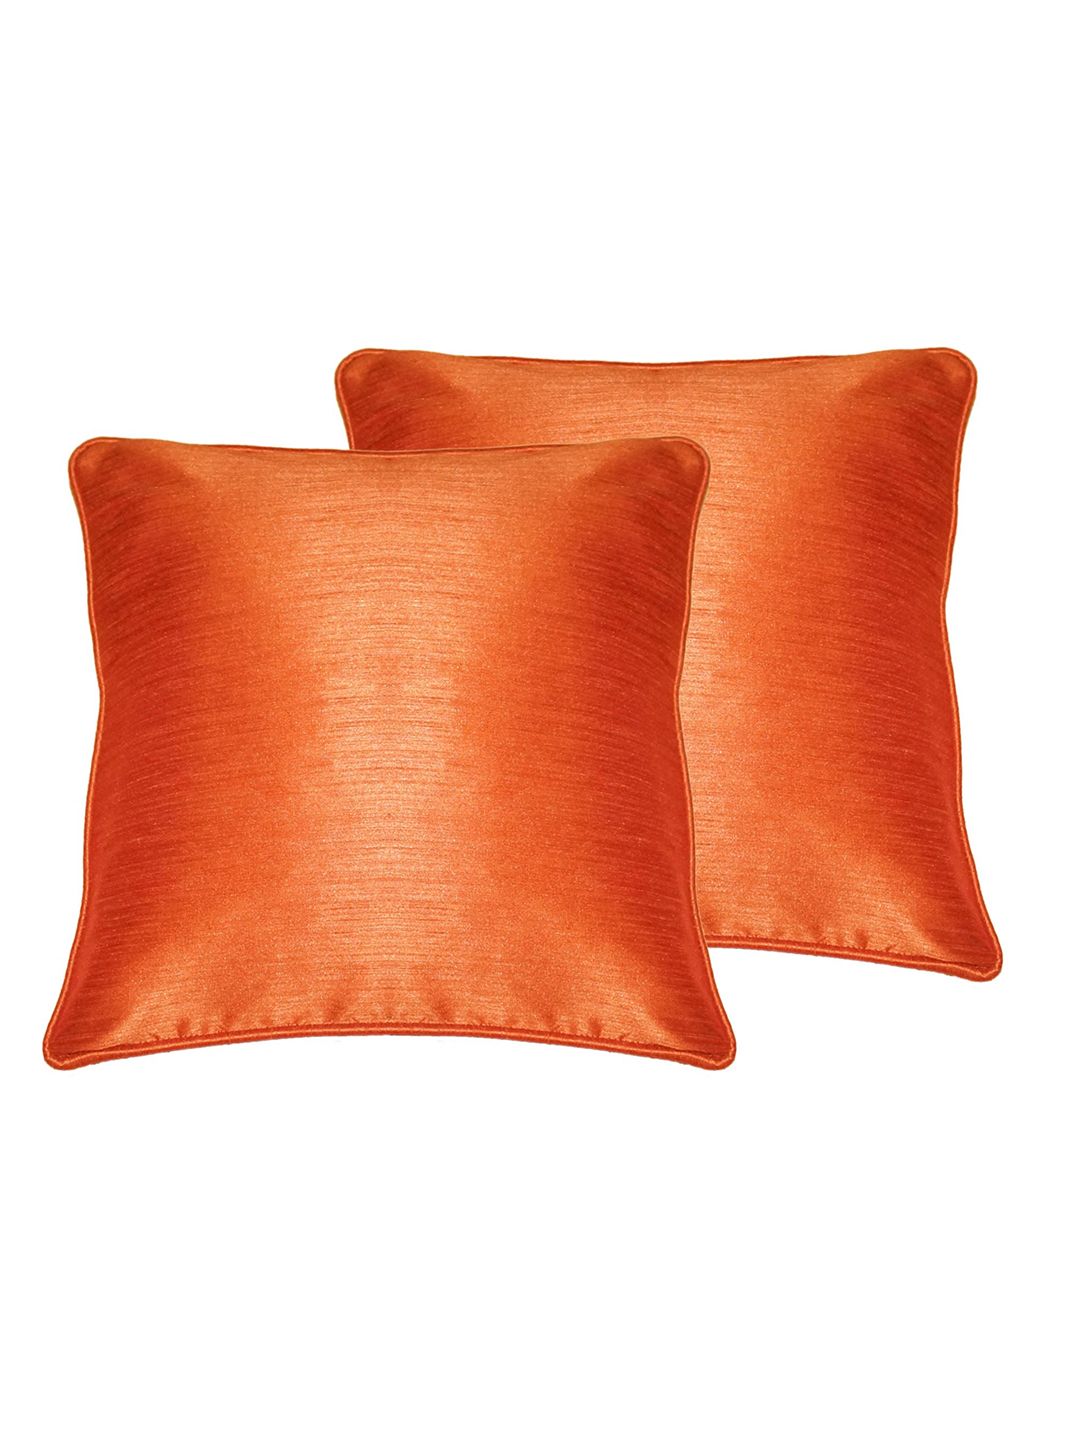 Lushomes Orange Set of 2 Square Cushion Covers 12 x 12 inches Price in India